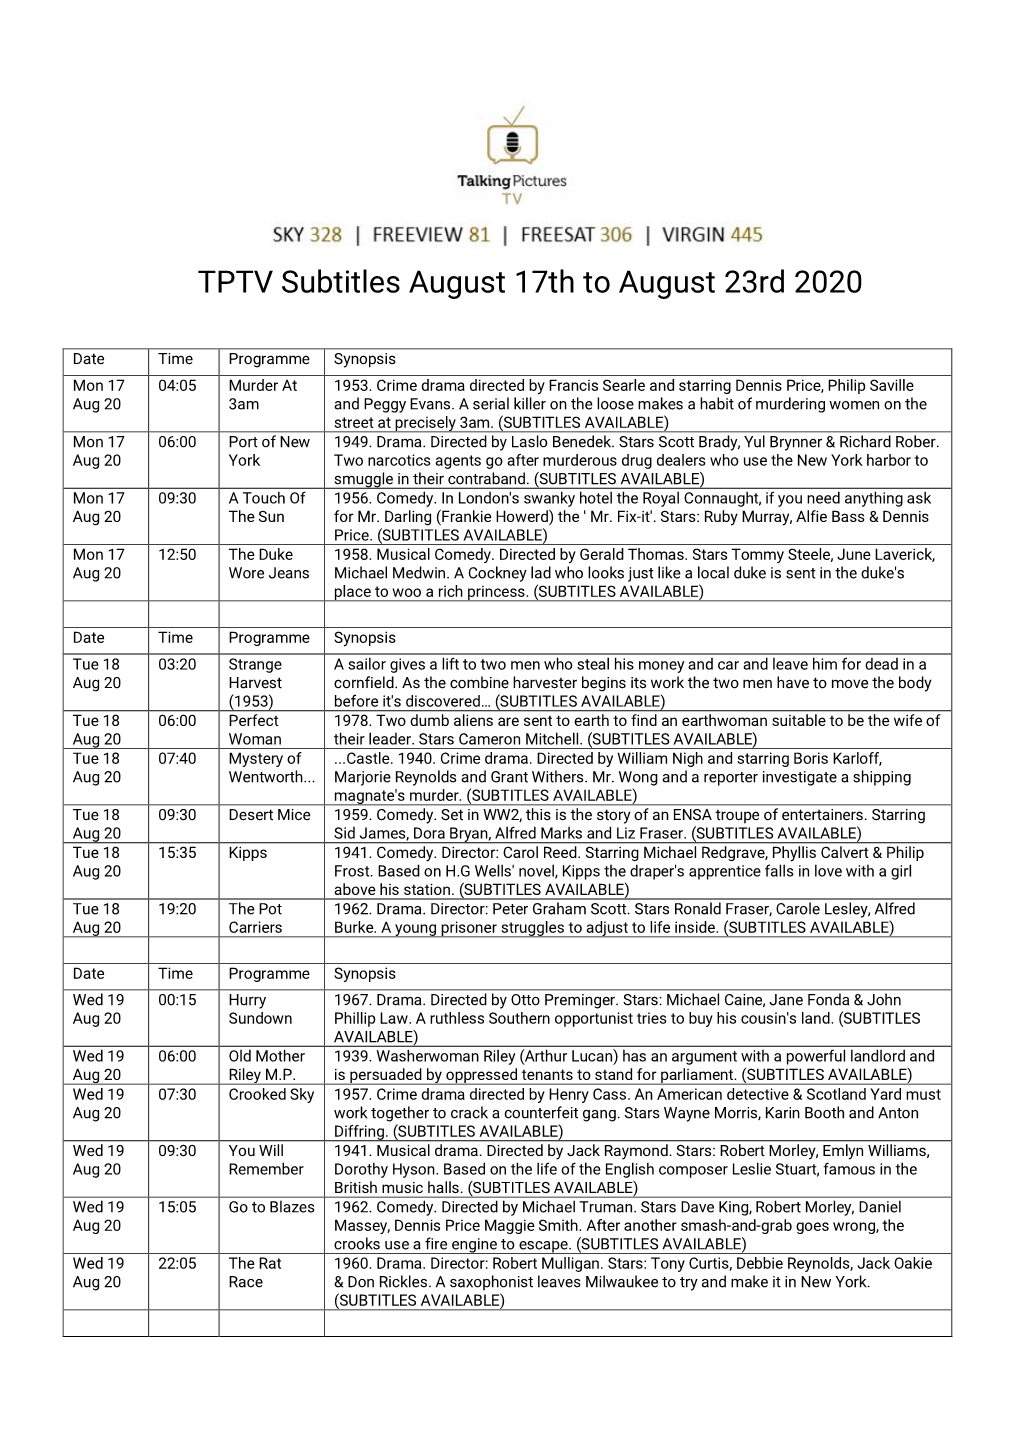 TPTV Subtitles August 17Th to August 23Rd 2020